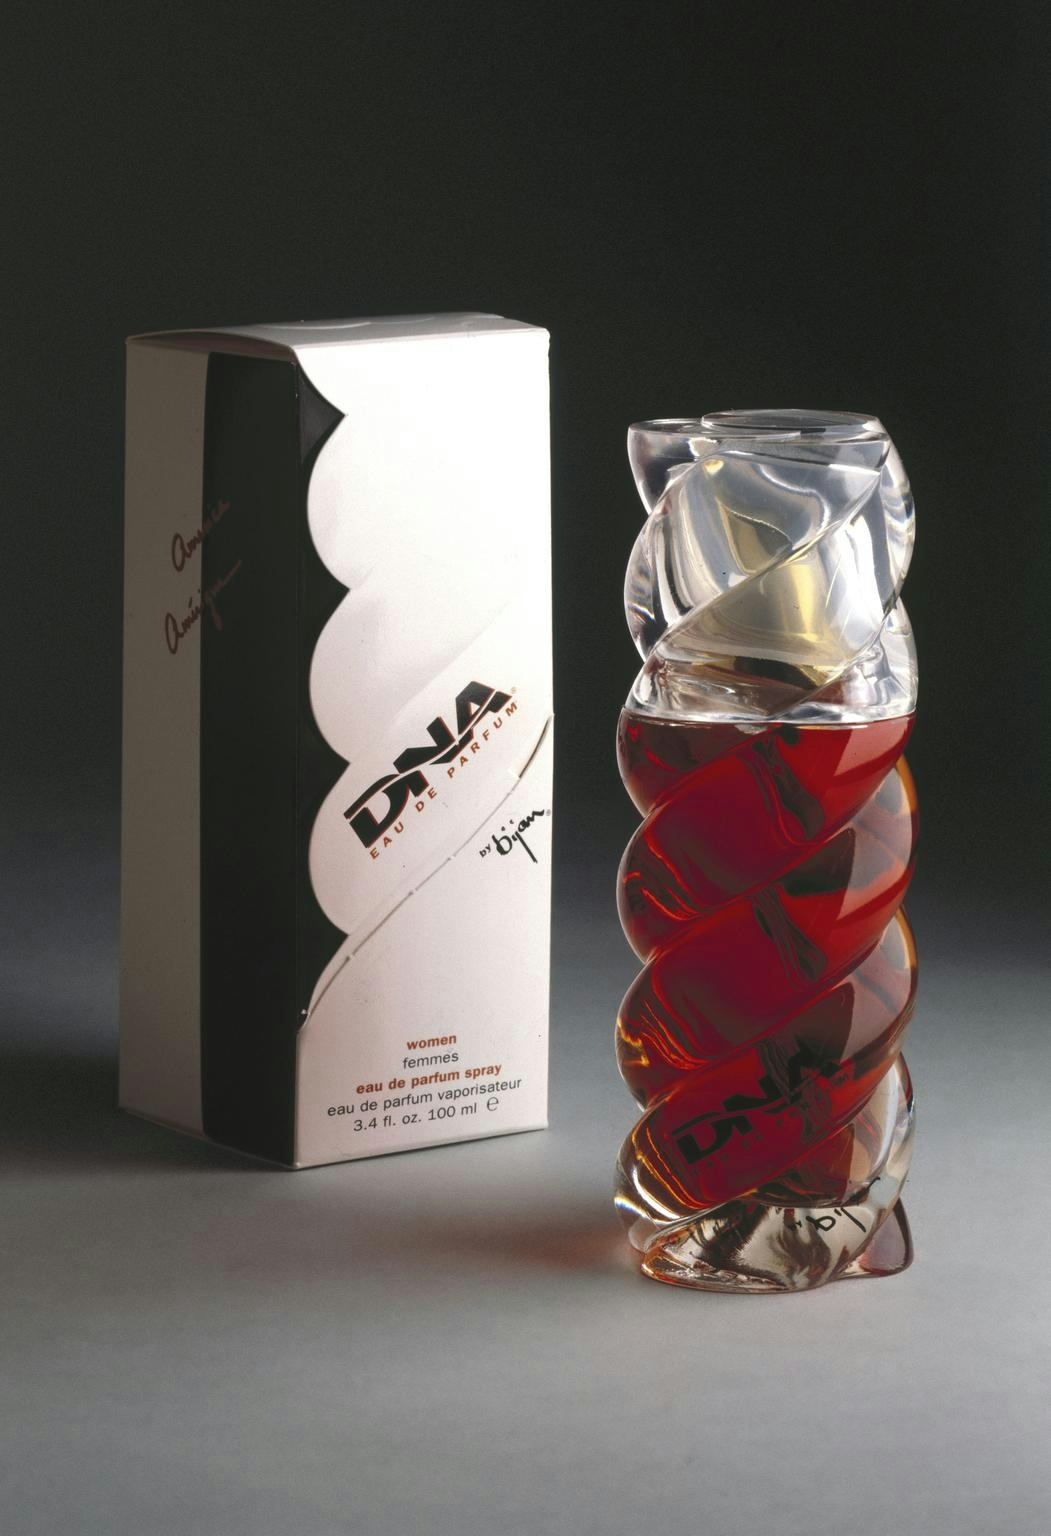 Photograph of a glass helical-shaped bottle of 'DNA eau de parfum', standing in front its packaging, prminently labelled 'DNA'.